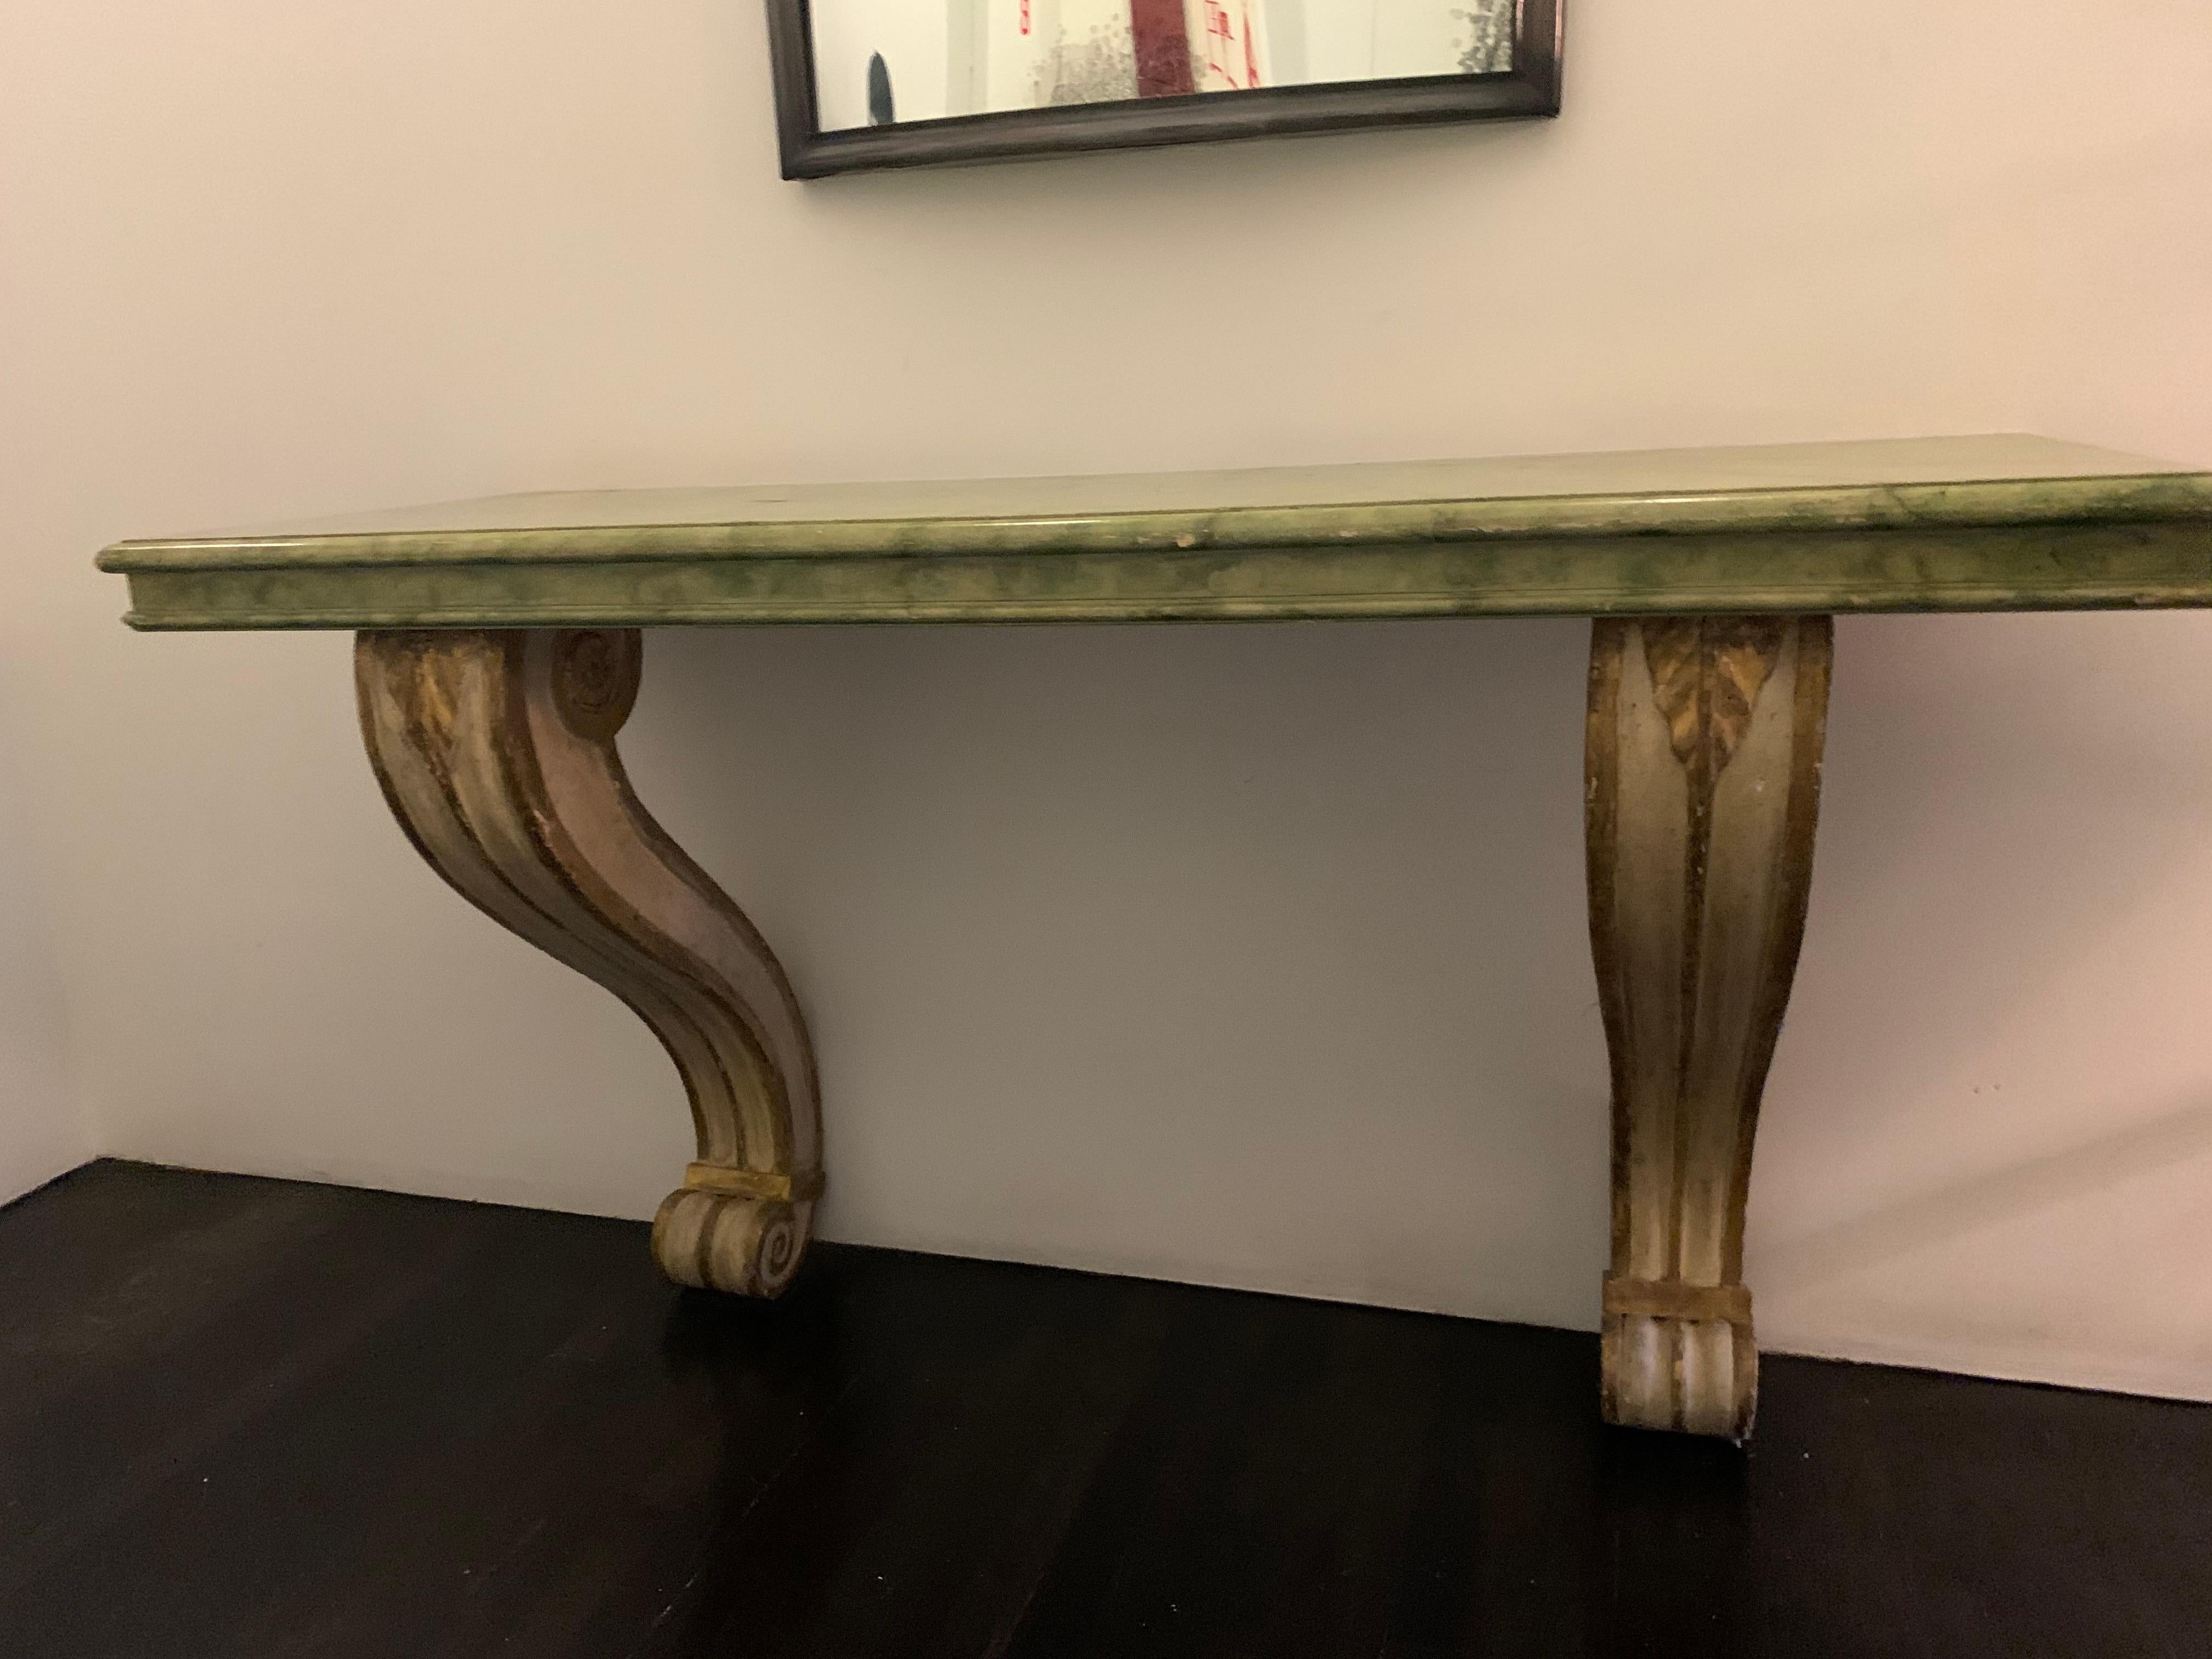 Italian faux finish console table. Decorative painted console that looks like it came out of a 20th century Italian villa. 

Property from esteemed interior designer Juan Montoya. Juan Montoya is one of the most acclaimed and prolific interior